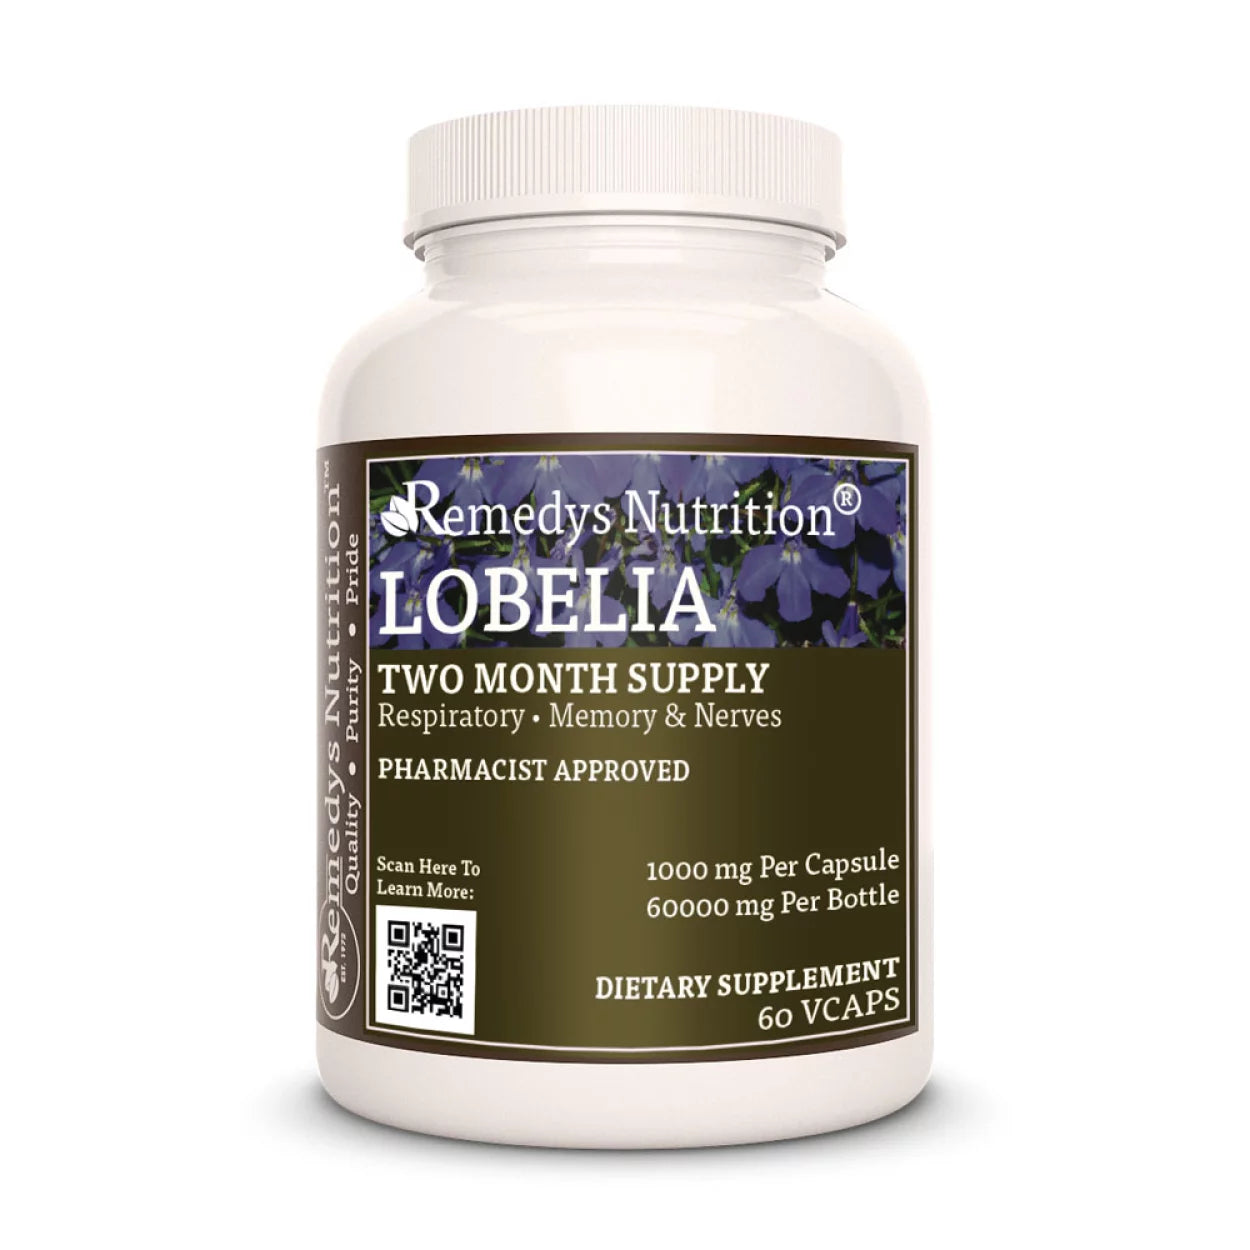 Image of Remedy's Nutrition® Lobelia Capsules Herbal Dietary Supplement front bottle. Made in the USA.